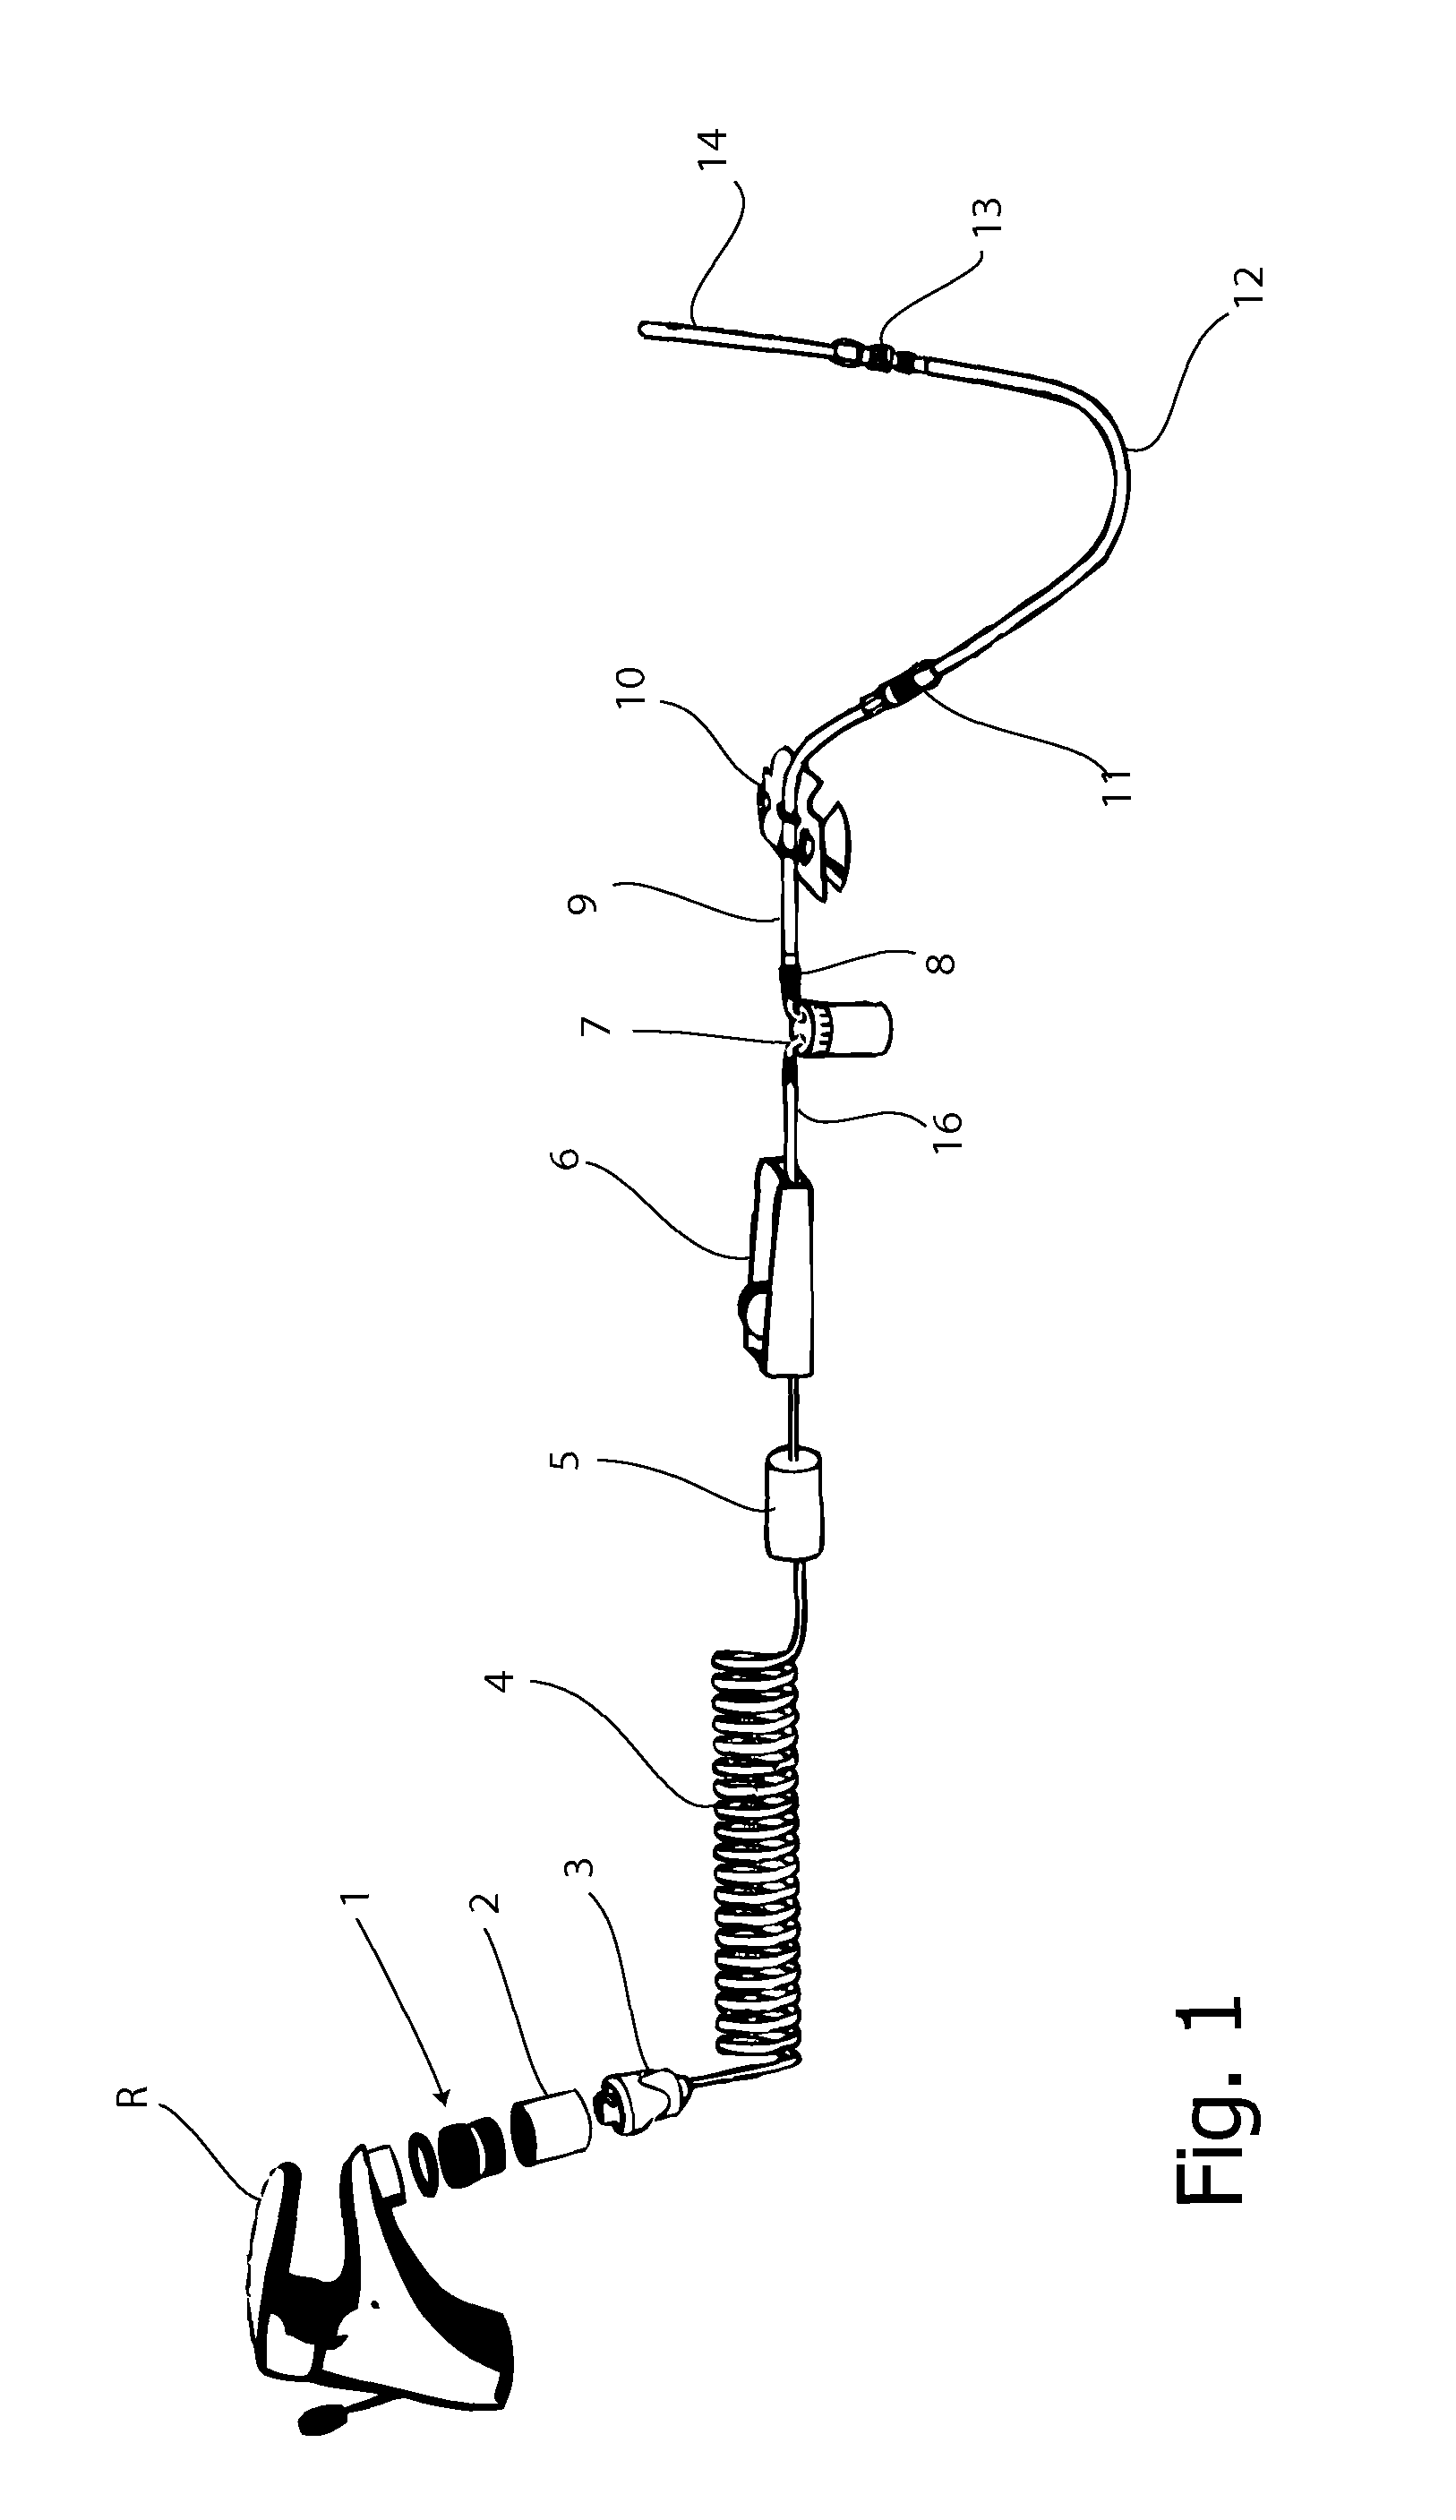 Sanitary apparatus for intestinal cleansing